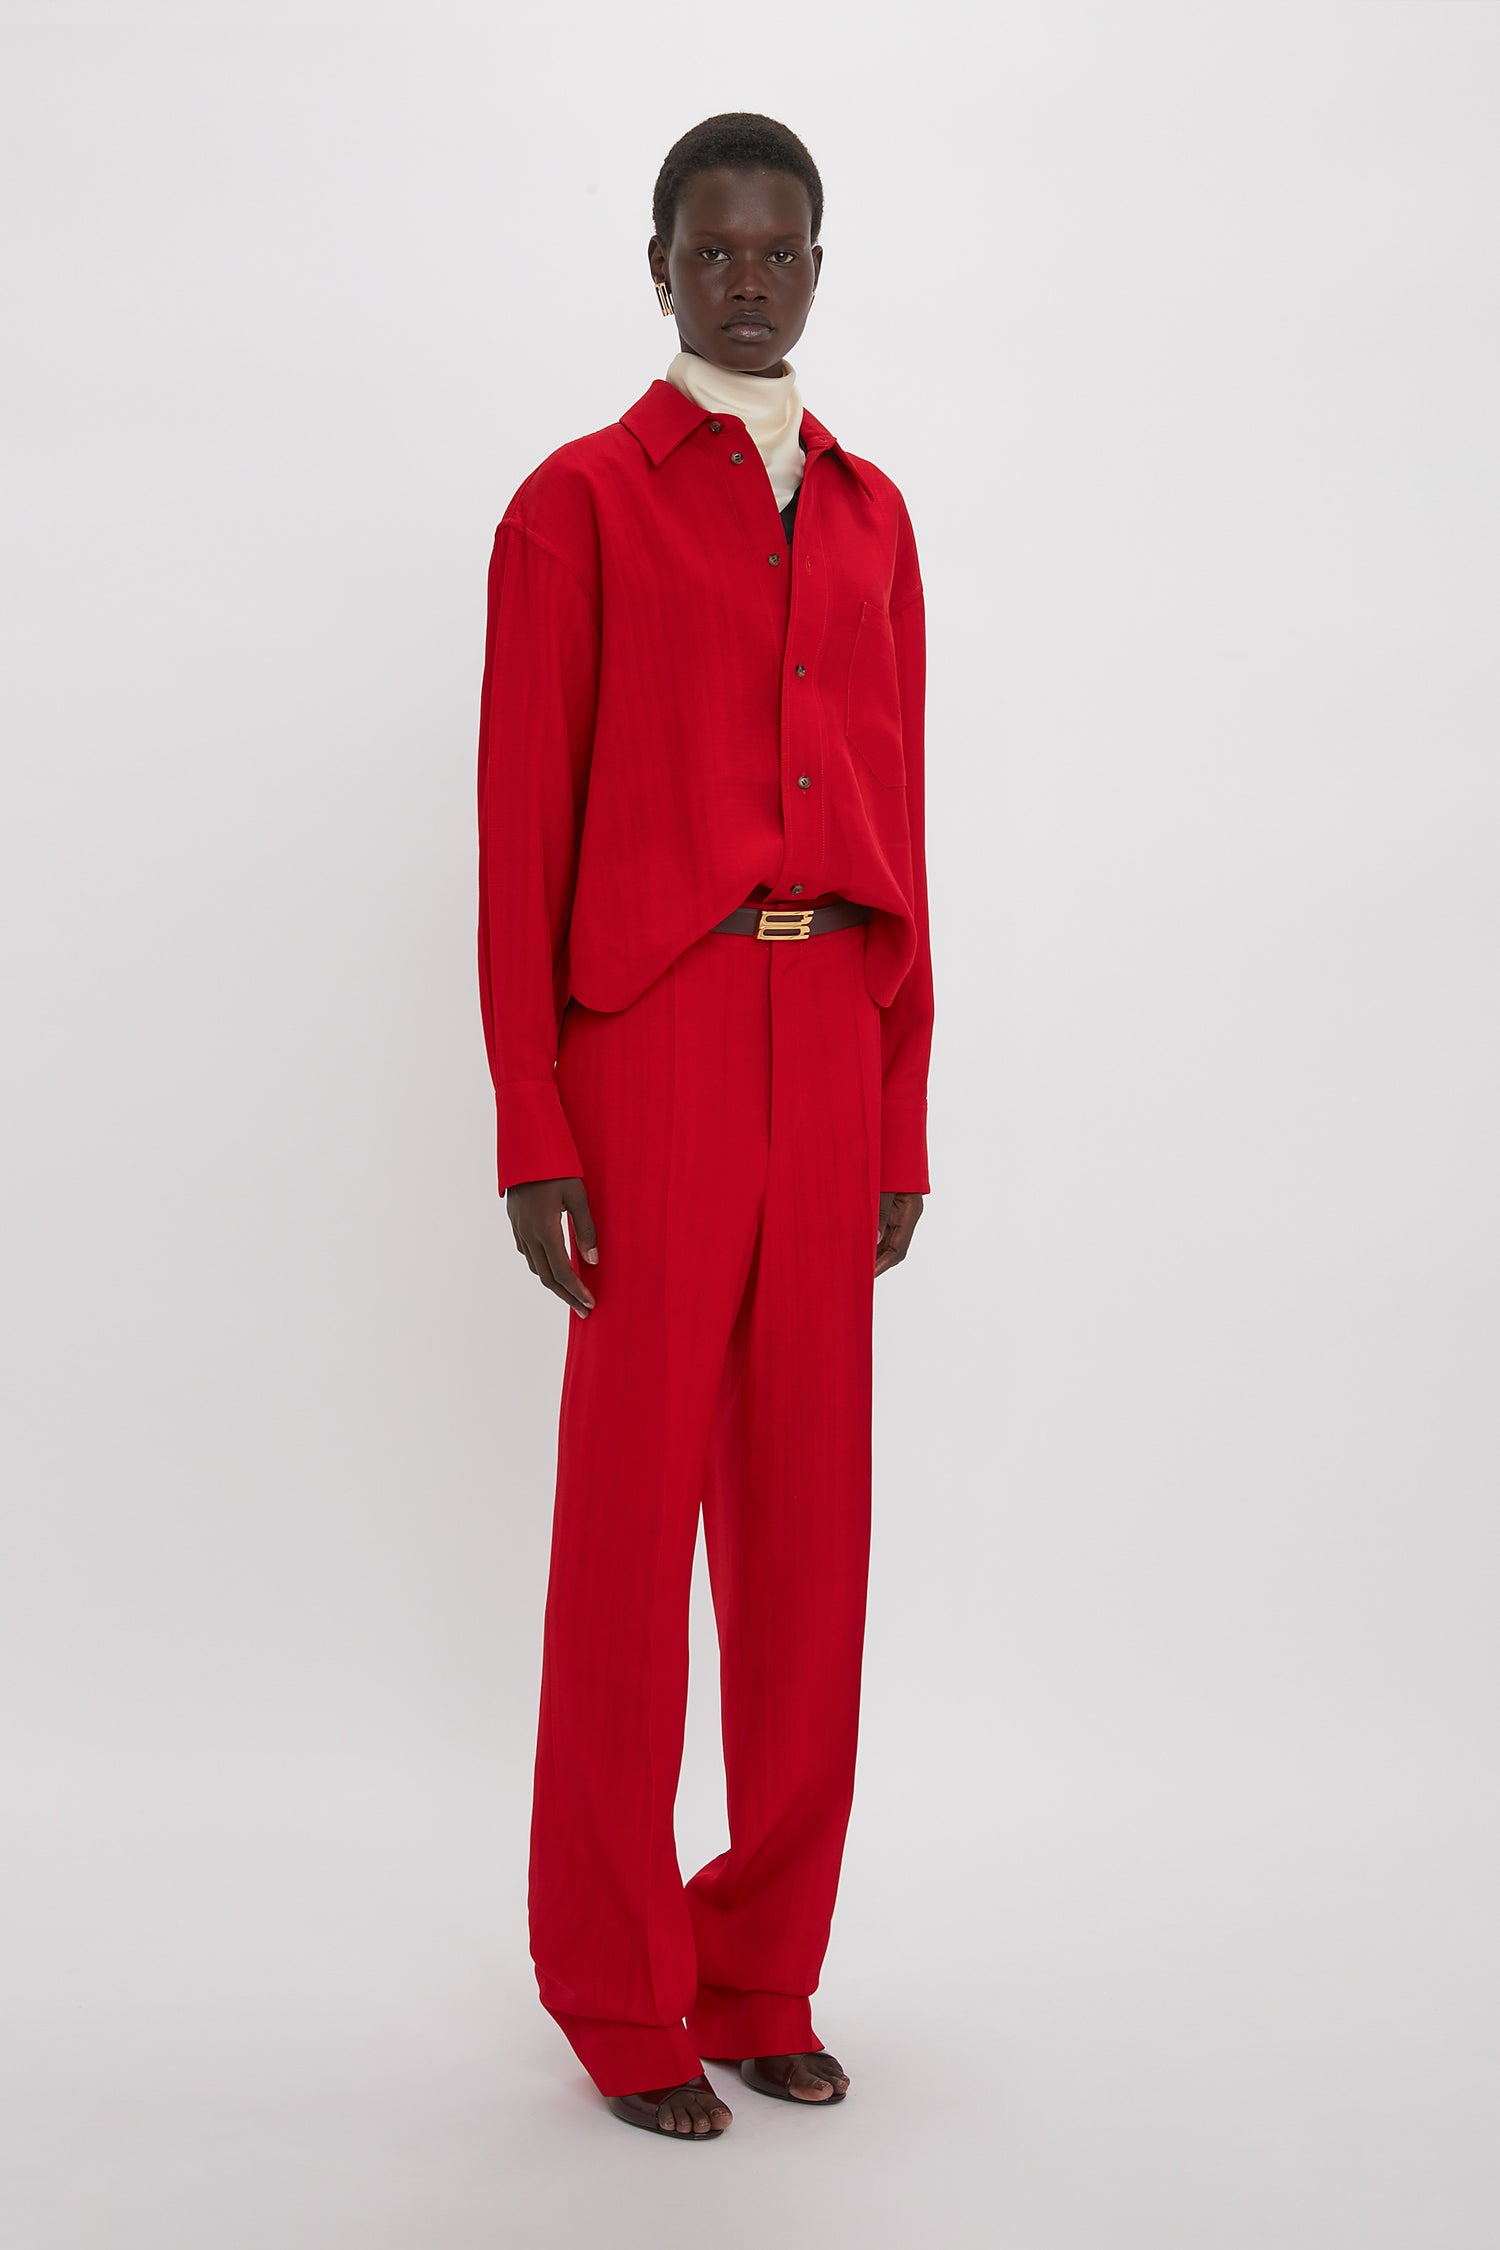 Person standing against a white background, wearing a carmine oversized button-down shirt and matching Tapered Leg Trouser In Carmine from Victoria Beckham. With elements of traditional tailoring, they have a neutral expression and are looking directly at the camera.